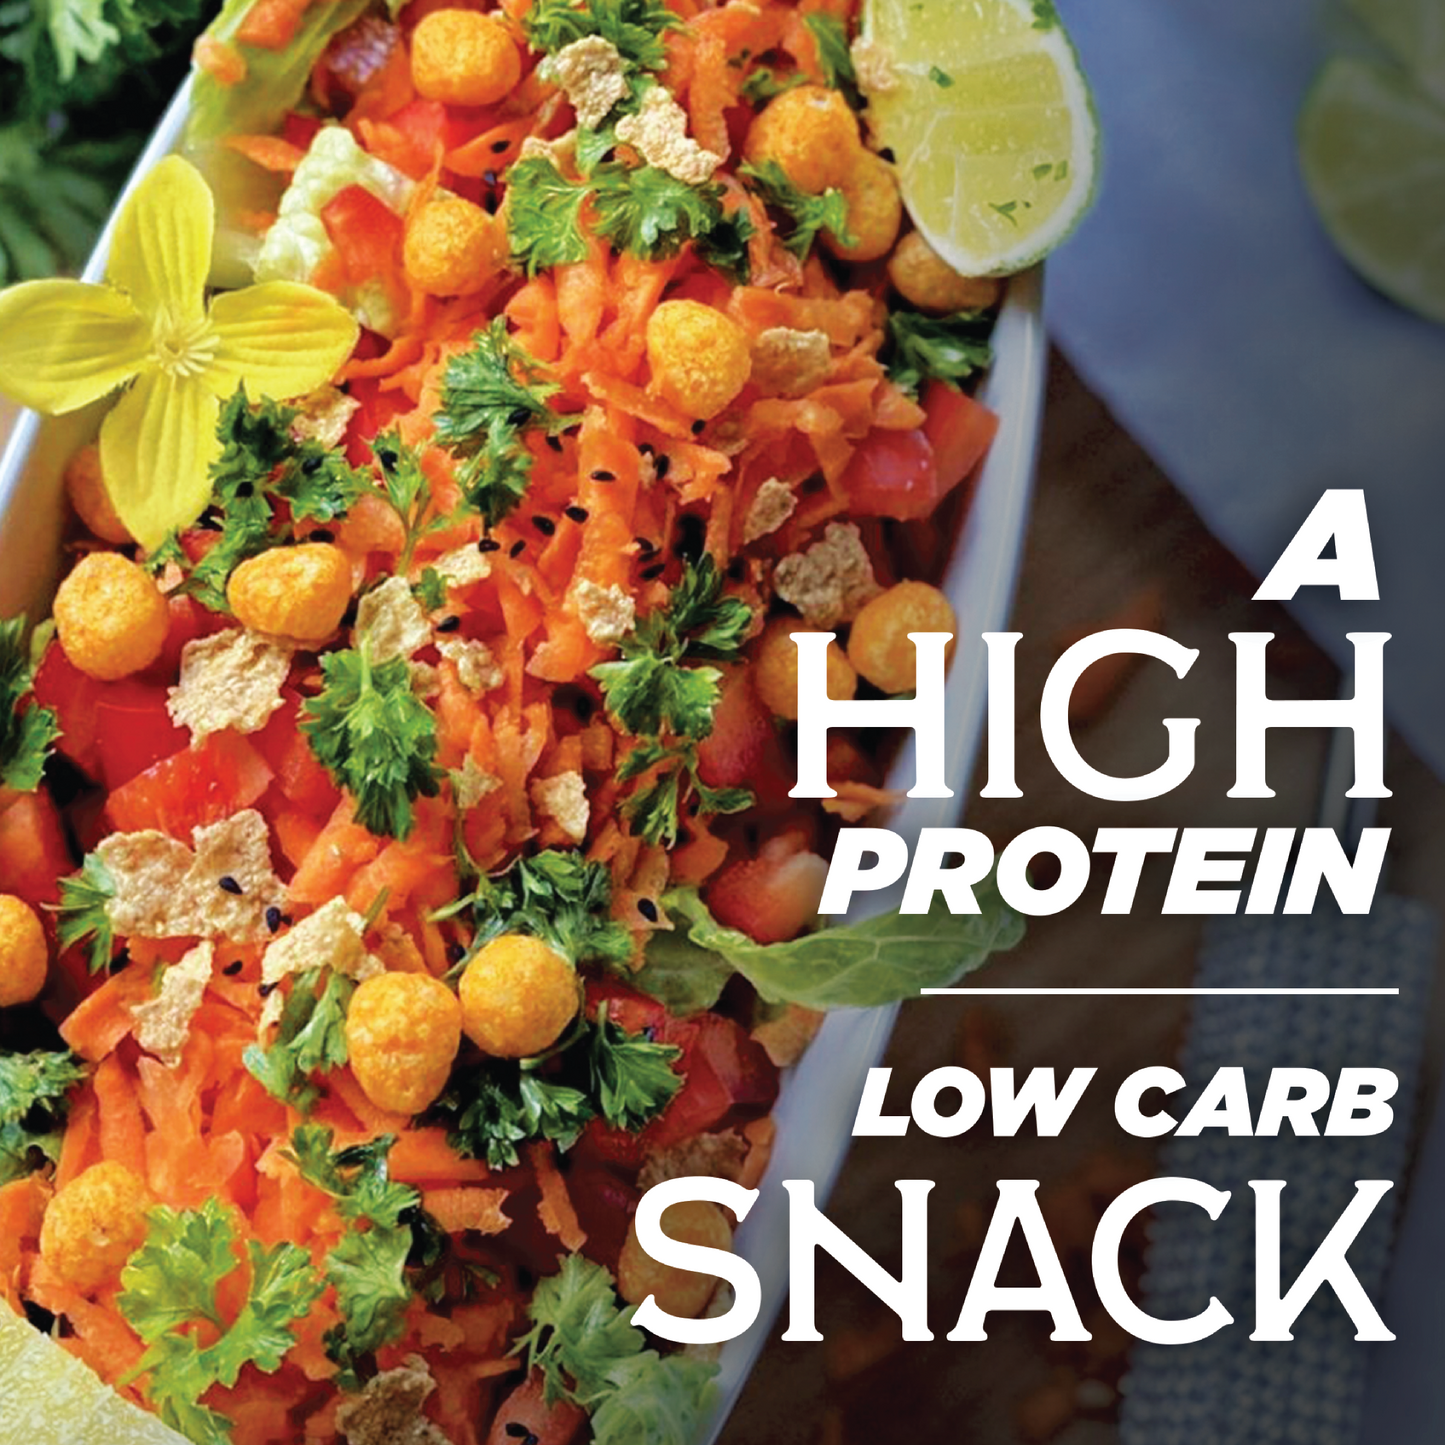 High Protein Low Carb Snack - Salad with Protein Puffs as a  Topping